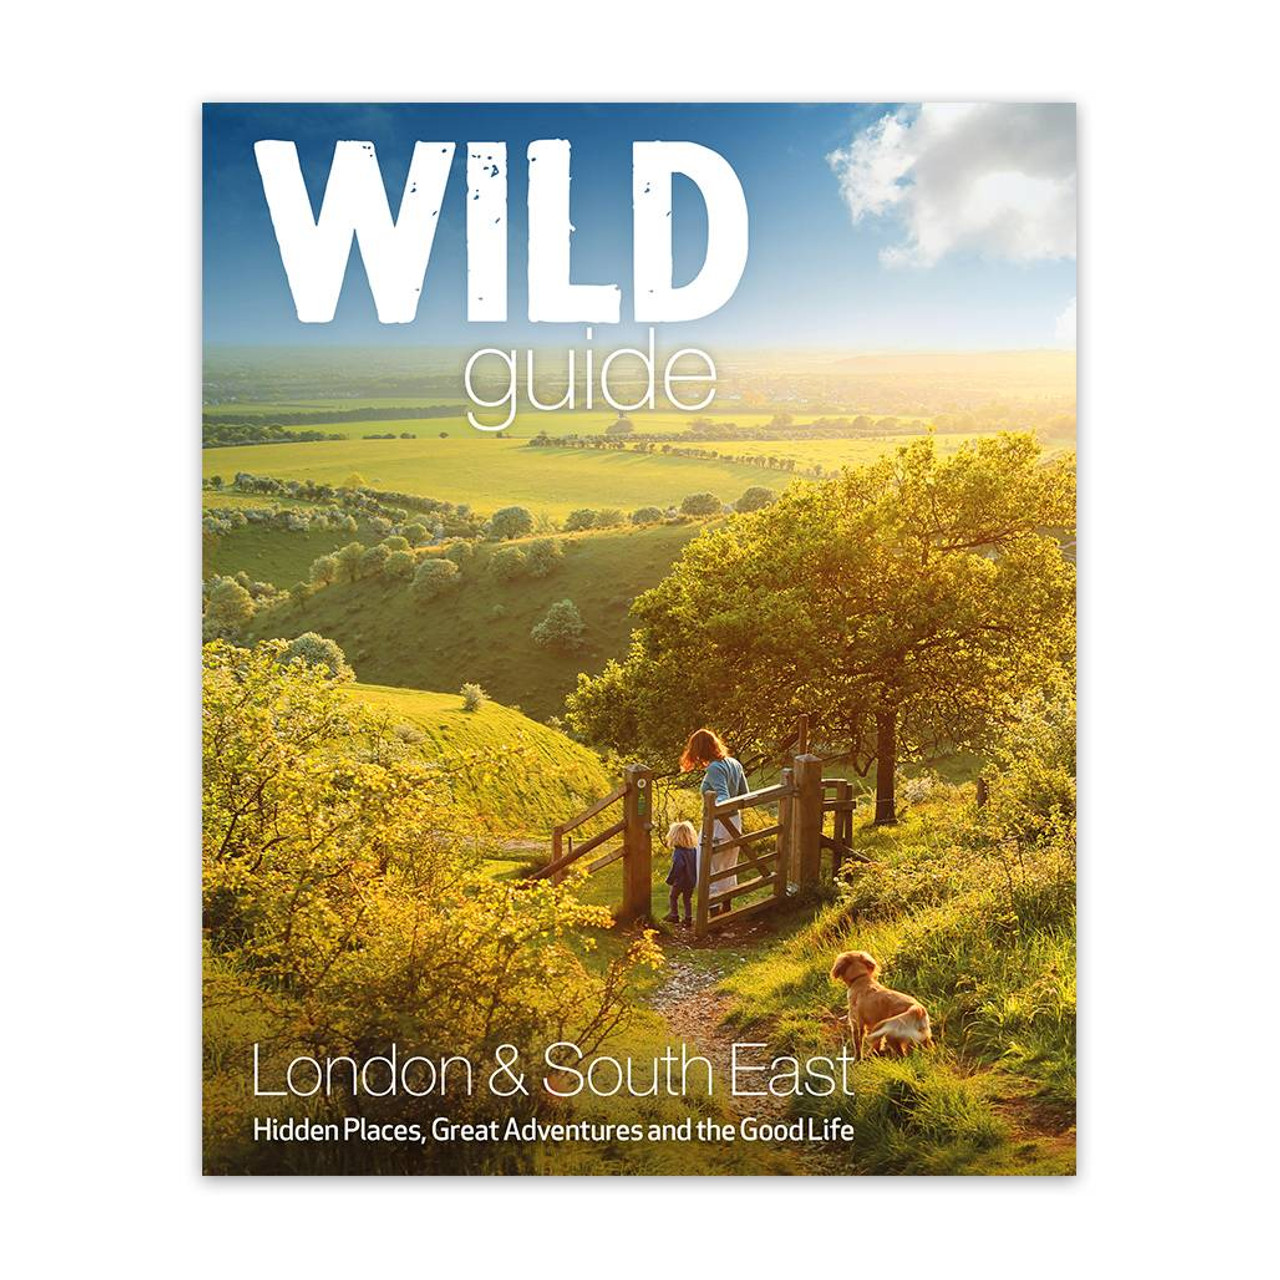 Wild Guide LondonandSouth East England